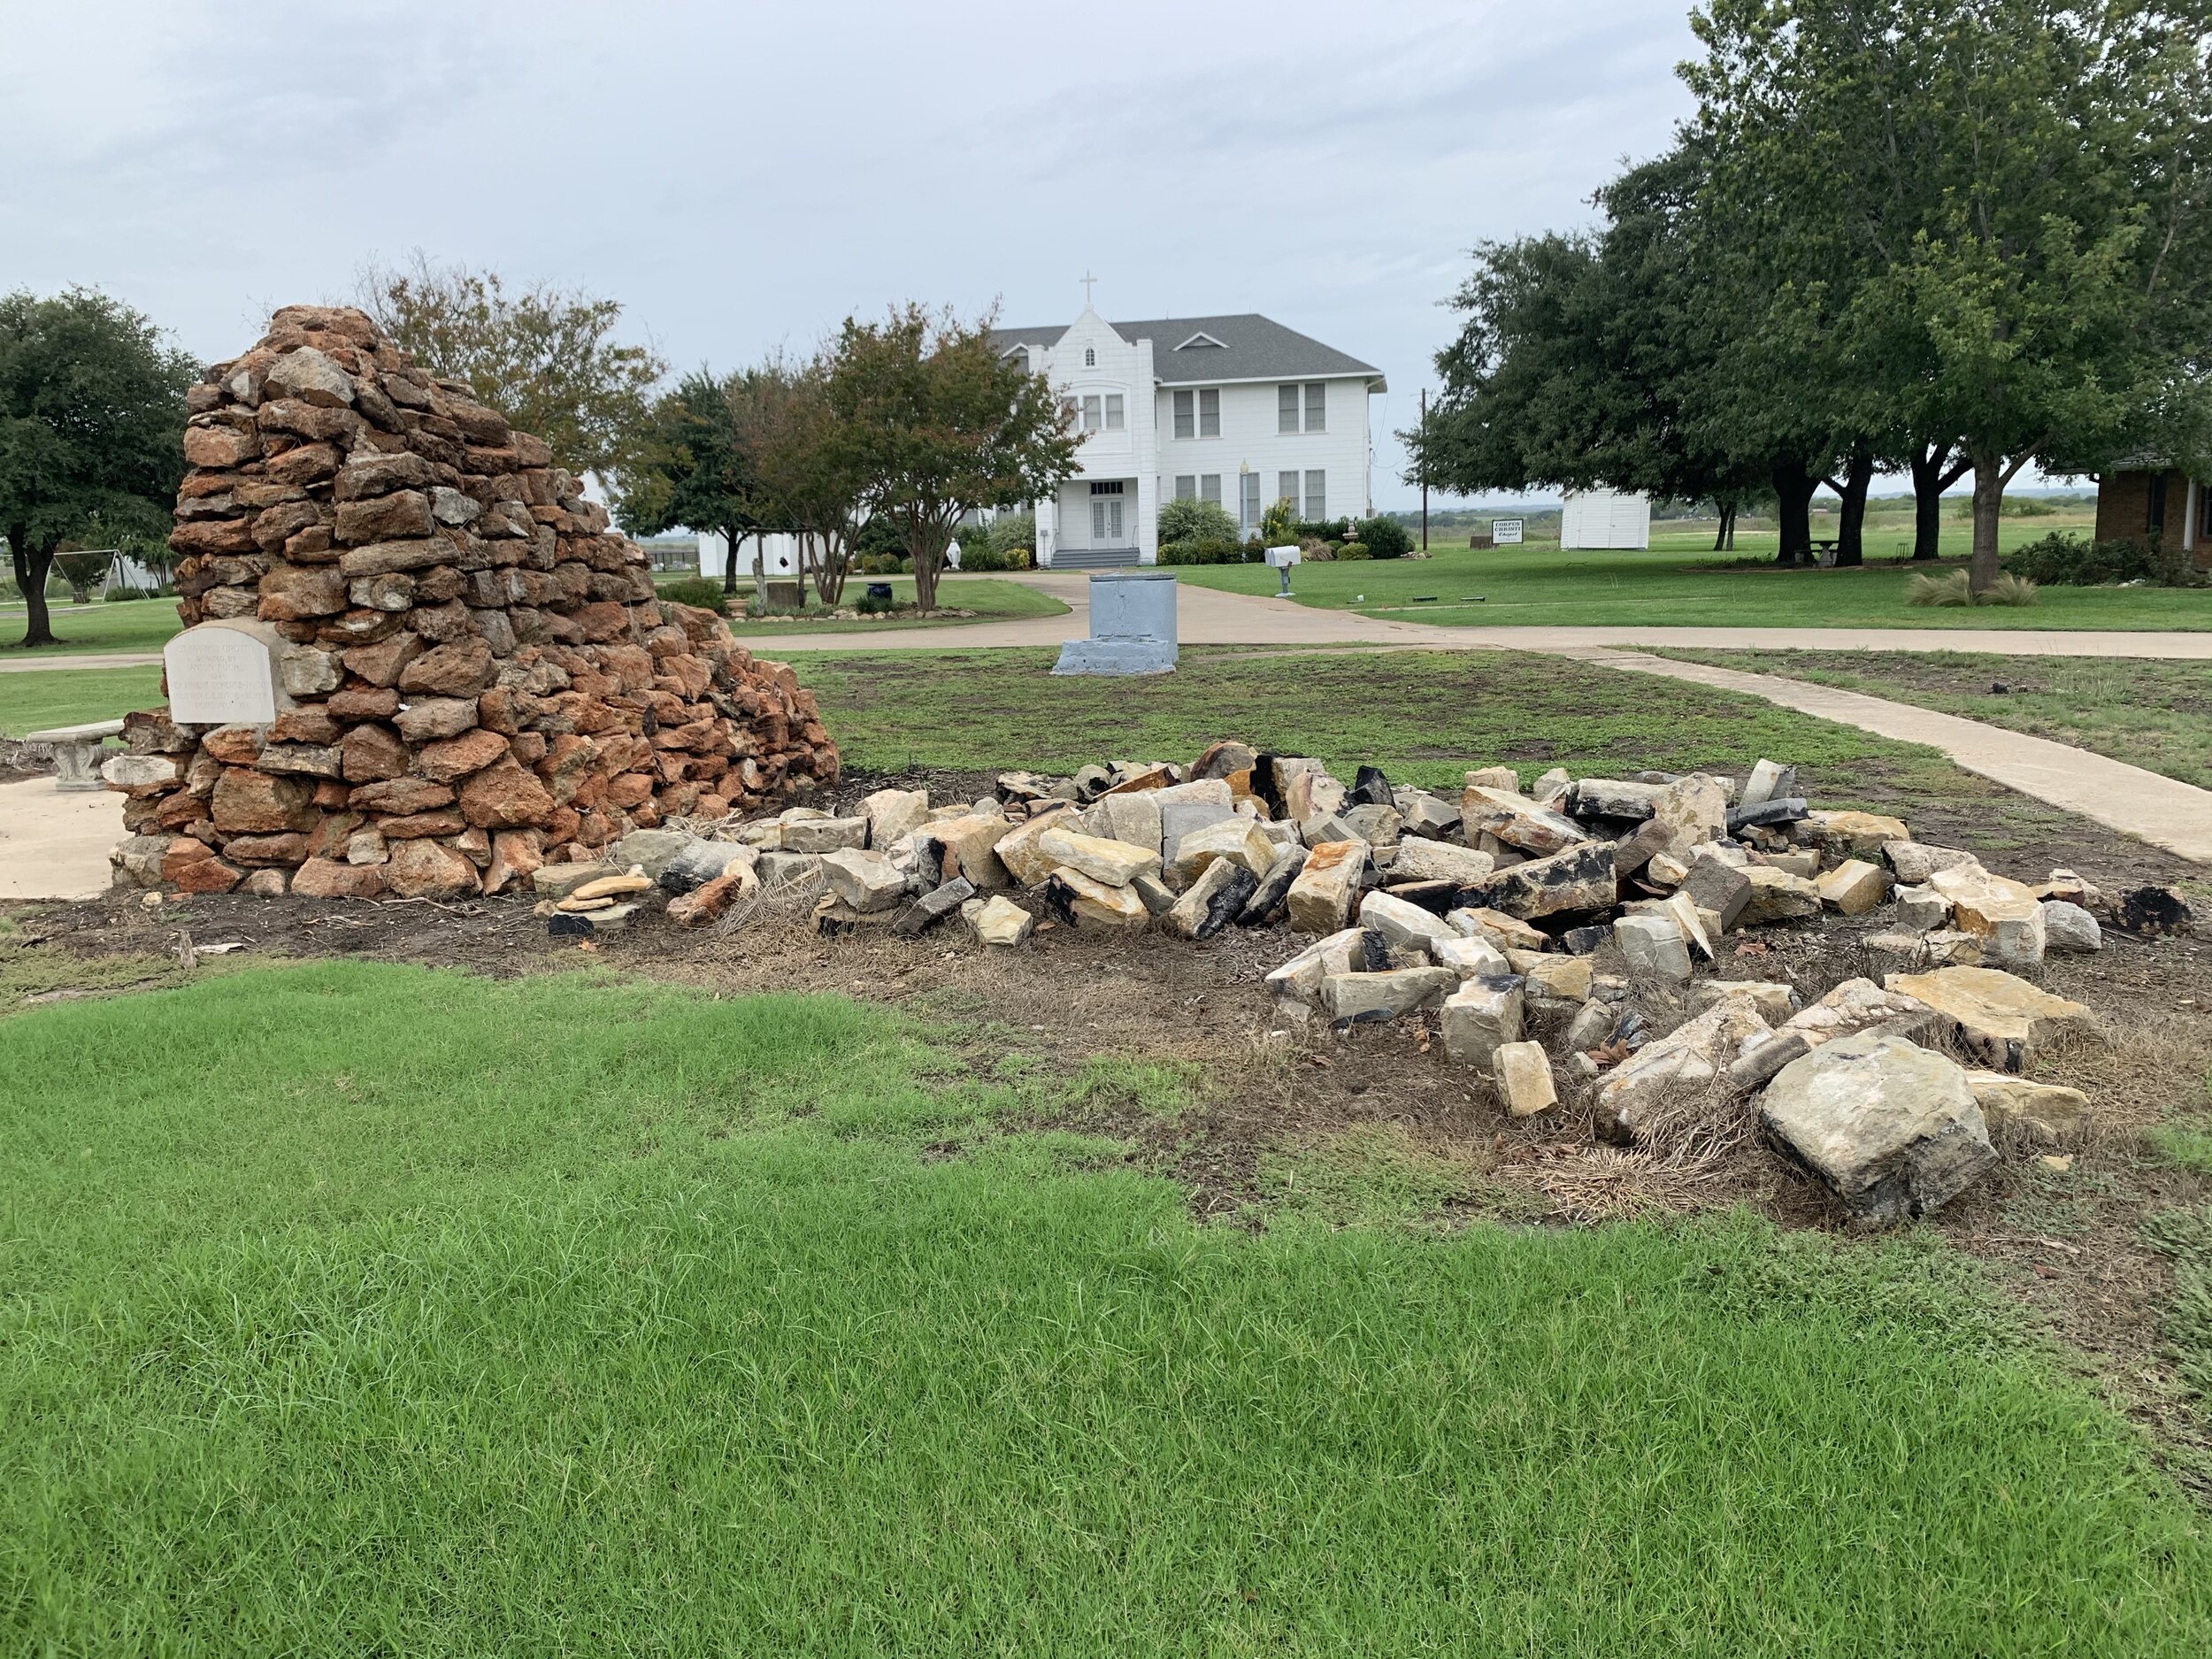  A pile of old stone footings also bear the ash and suit as evidence of the file that toppled the historic structure that stood on top of them for almost 125 years. 